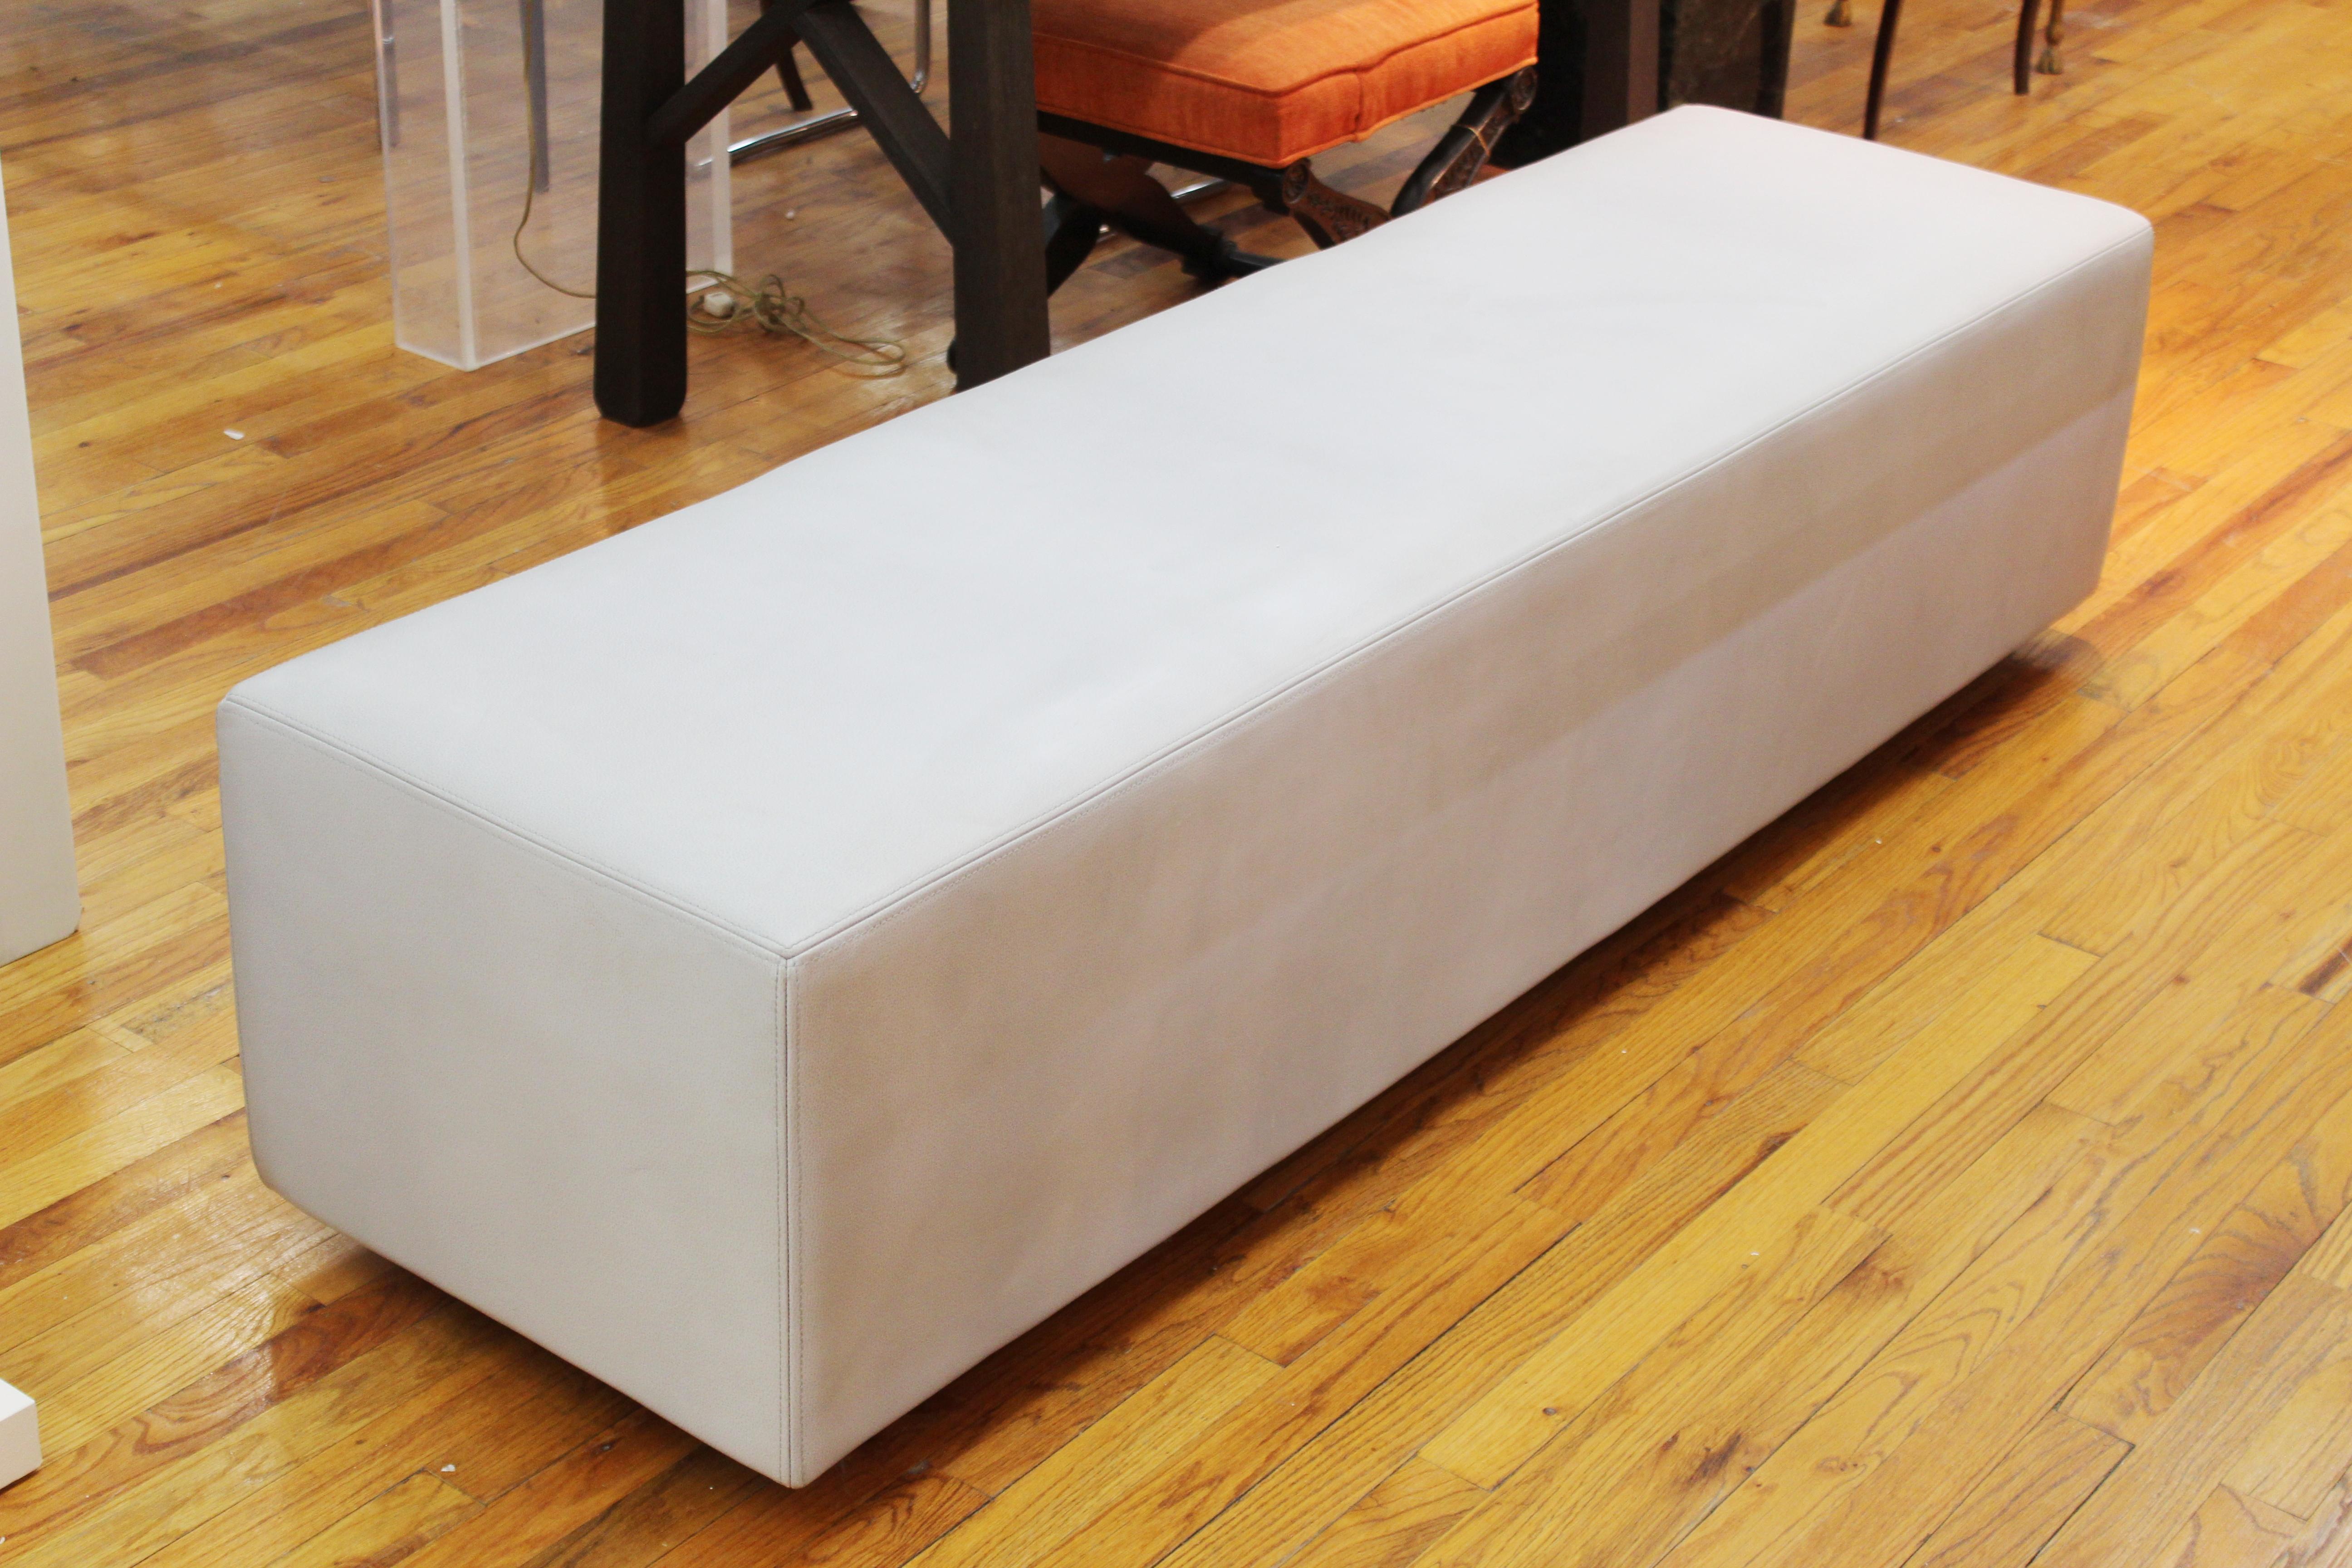 Modern long stretched rectangular bench attributed to Christian Liaigre. The piece is upholstered in pale blue leather. In great vintage condition with age-appropriate wear and use.